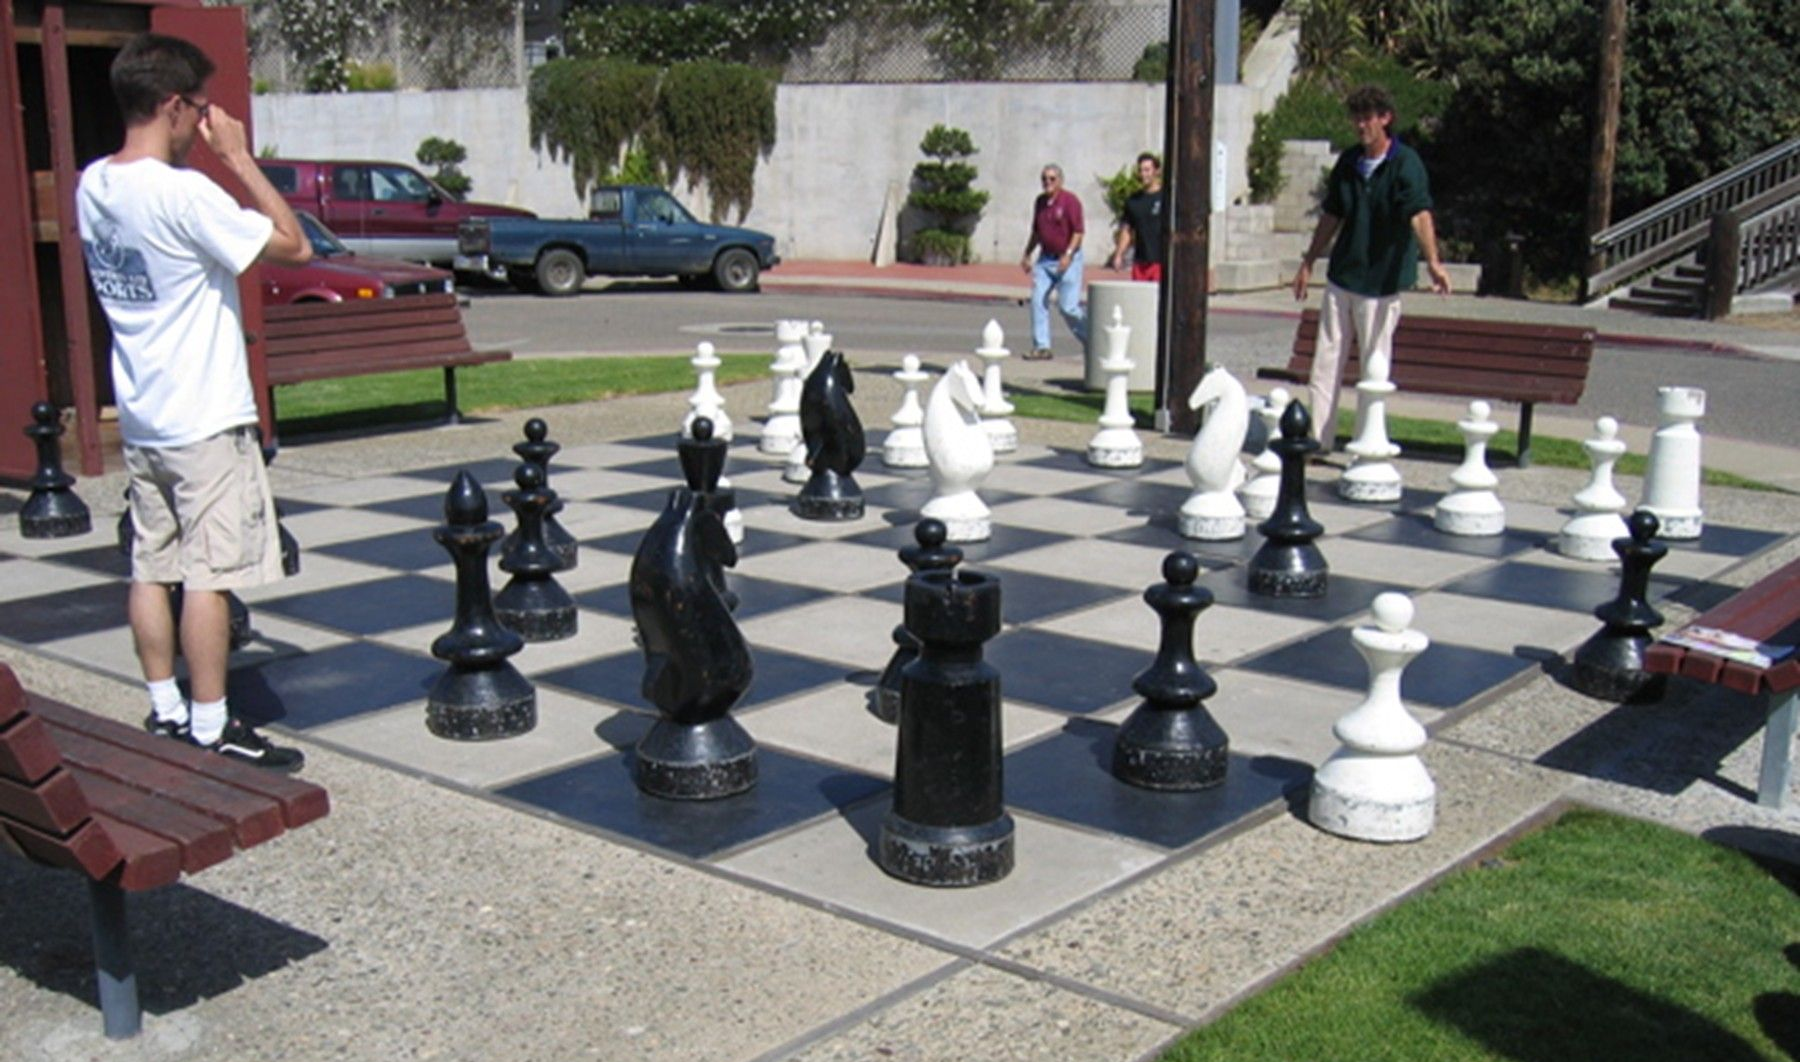 World's Largest Chess Set Publicly Accessible: world record set in Morro Bay, California